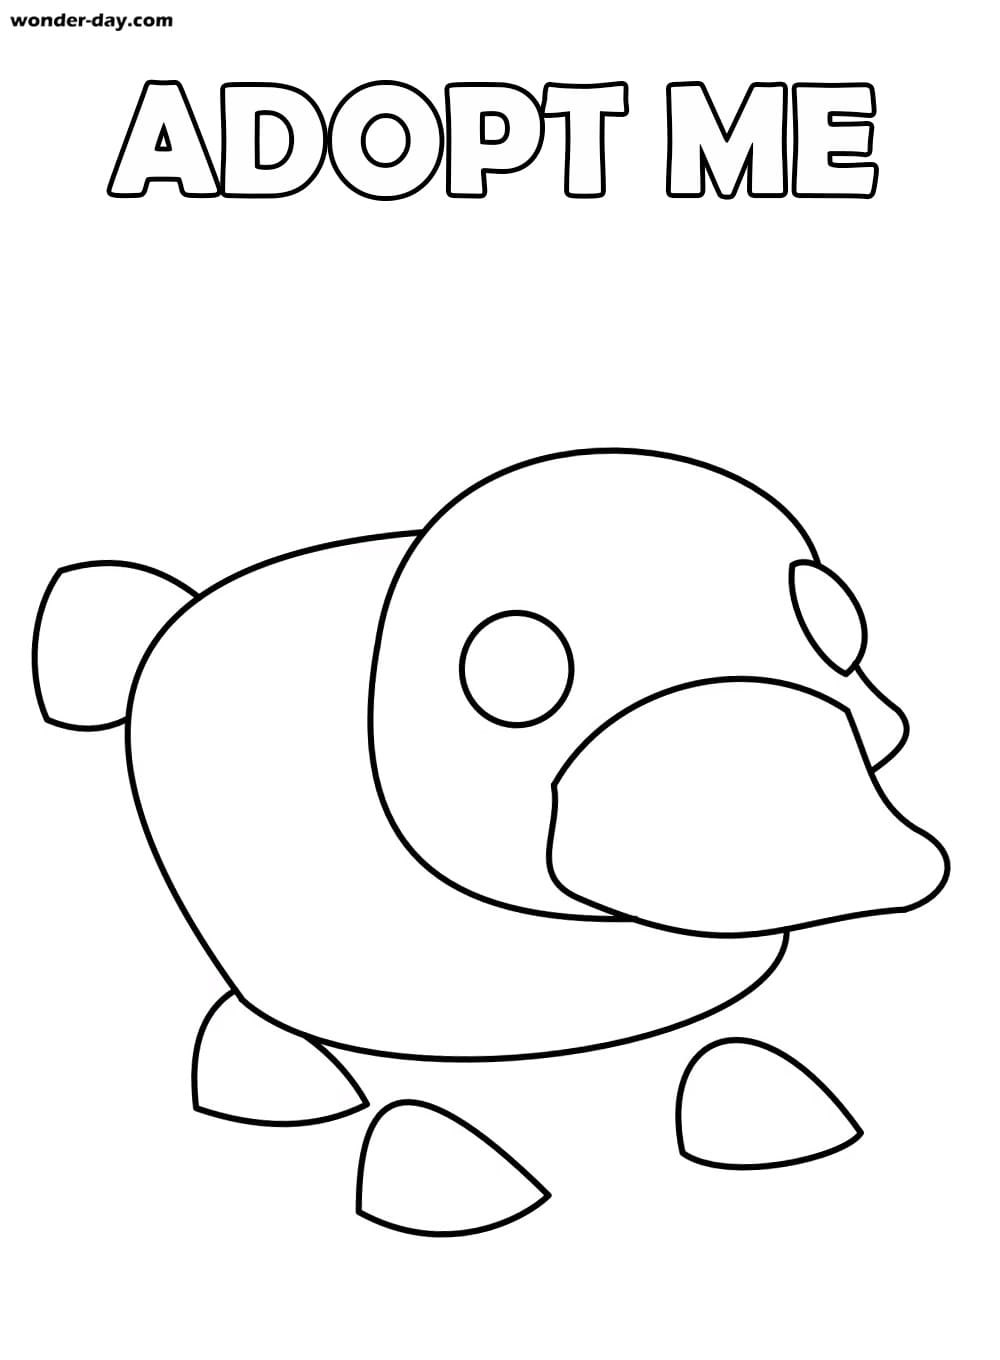 Adopt Me Coloring Pages Wonder Day Com - roblox adopt me pets drawings